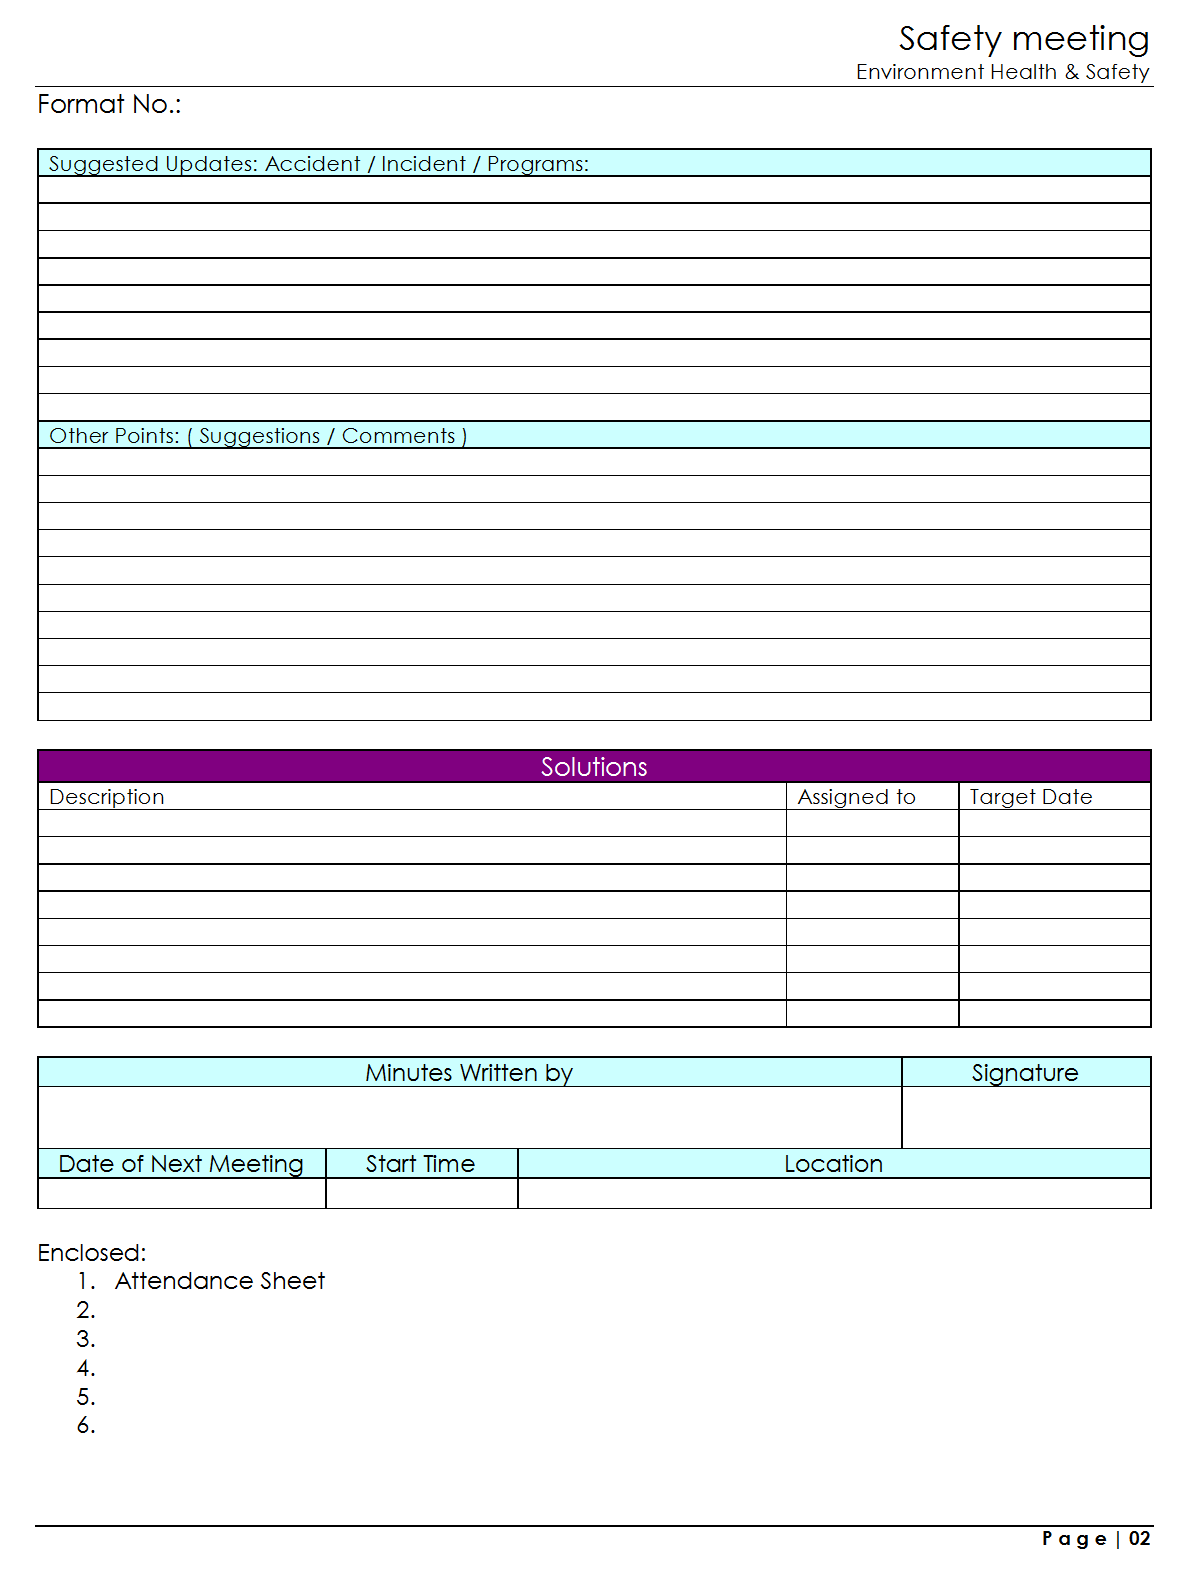 Safety Meeting - With Safety Committee Meeting Template